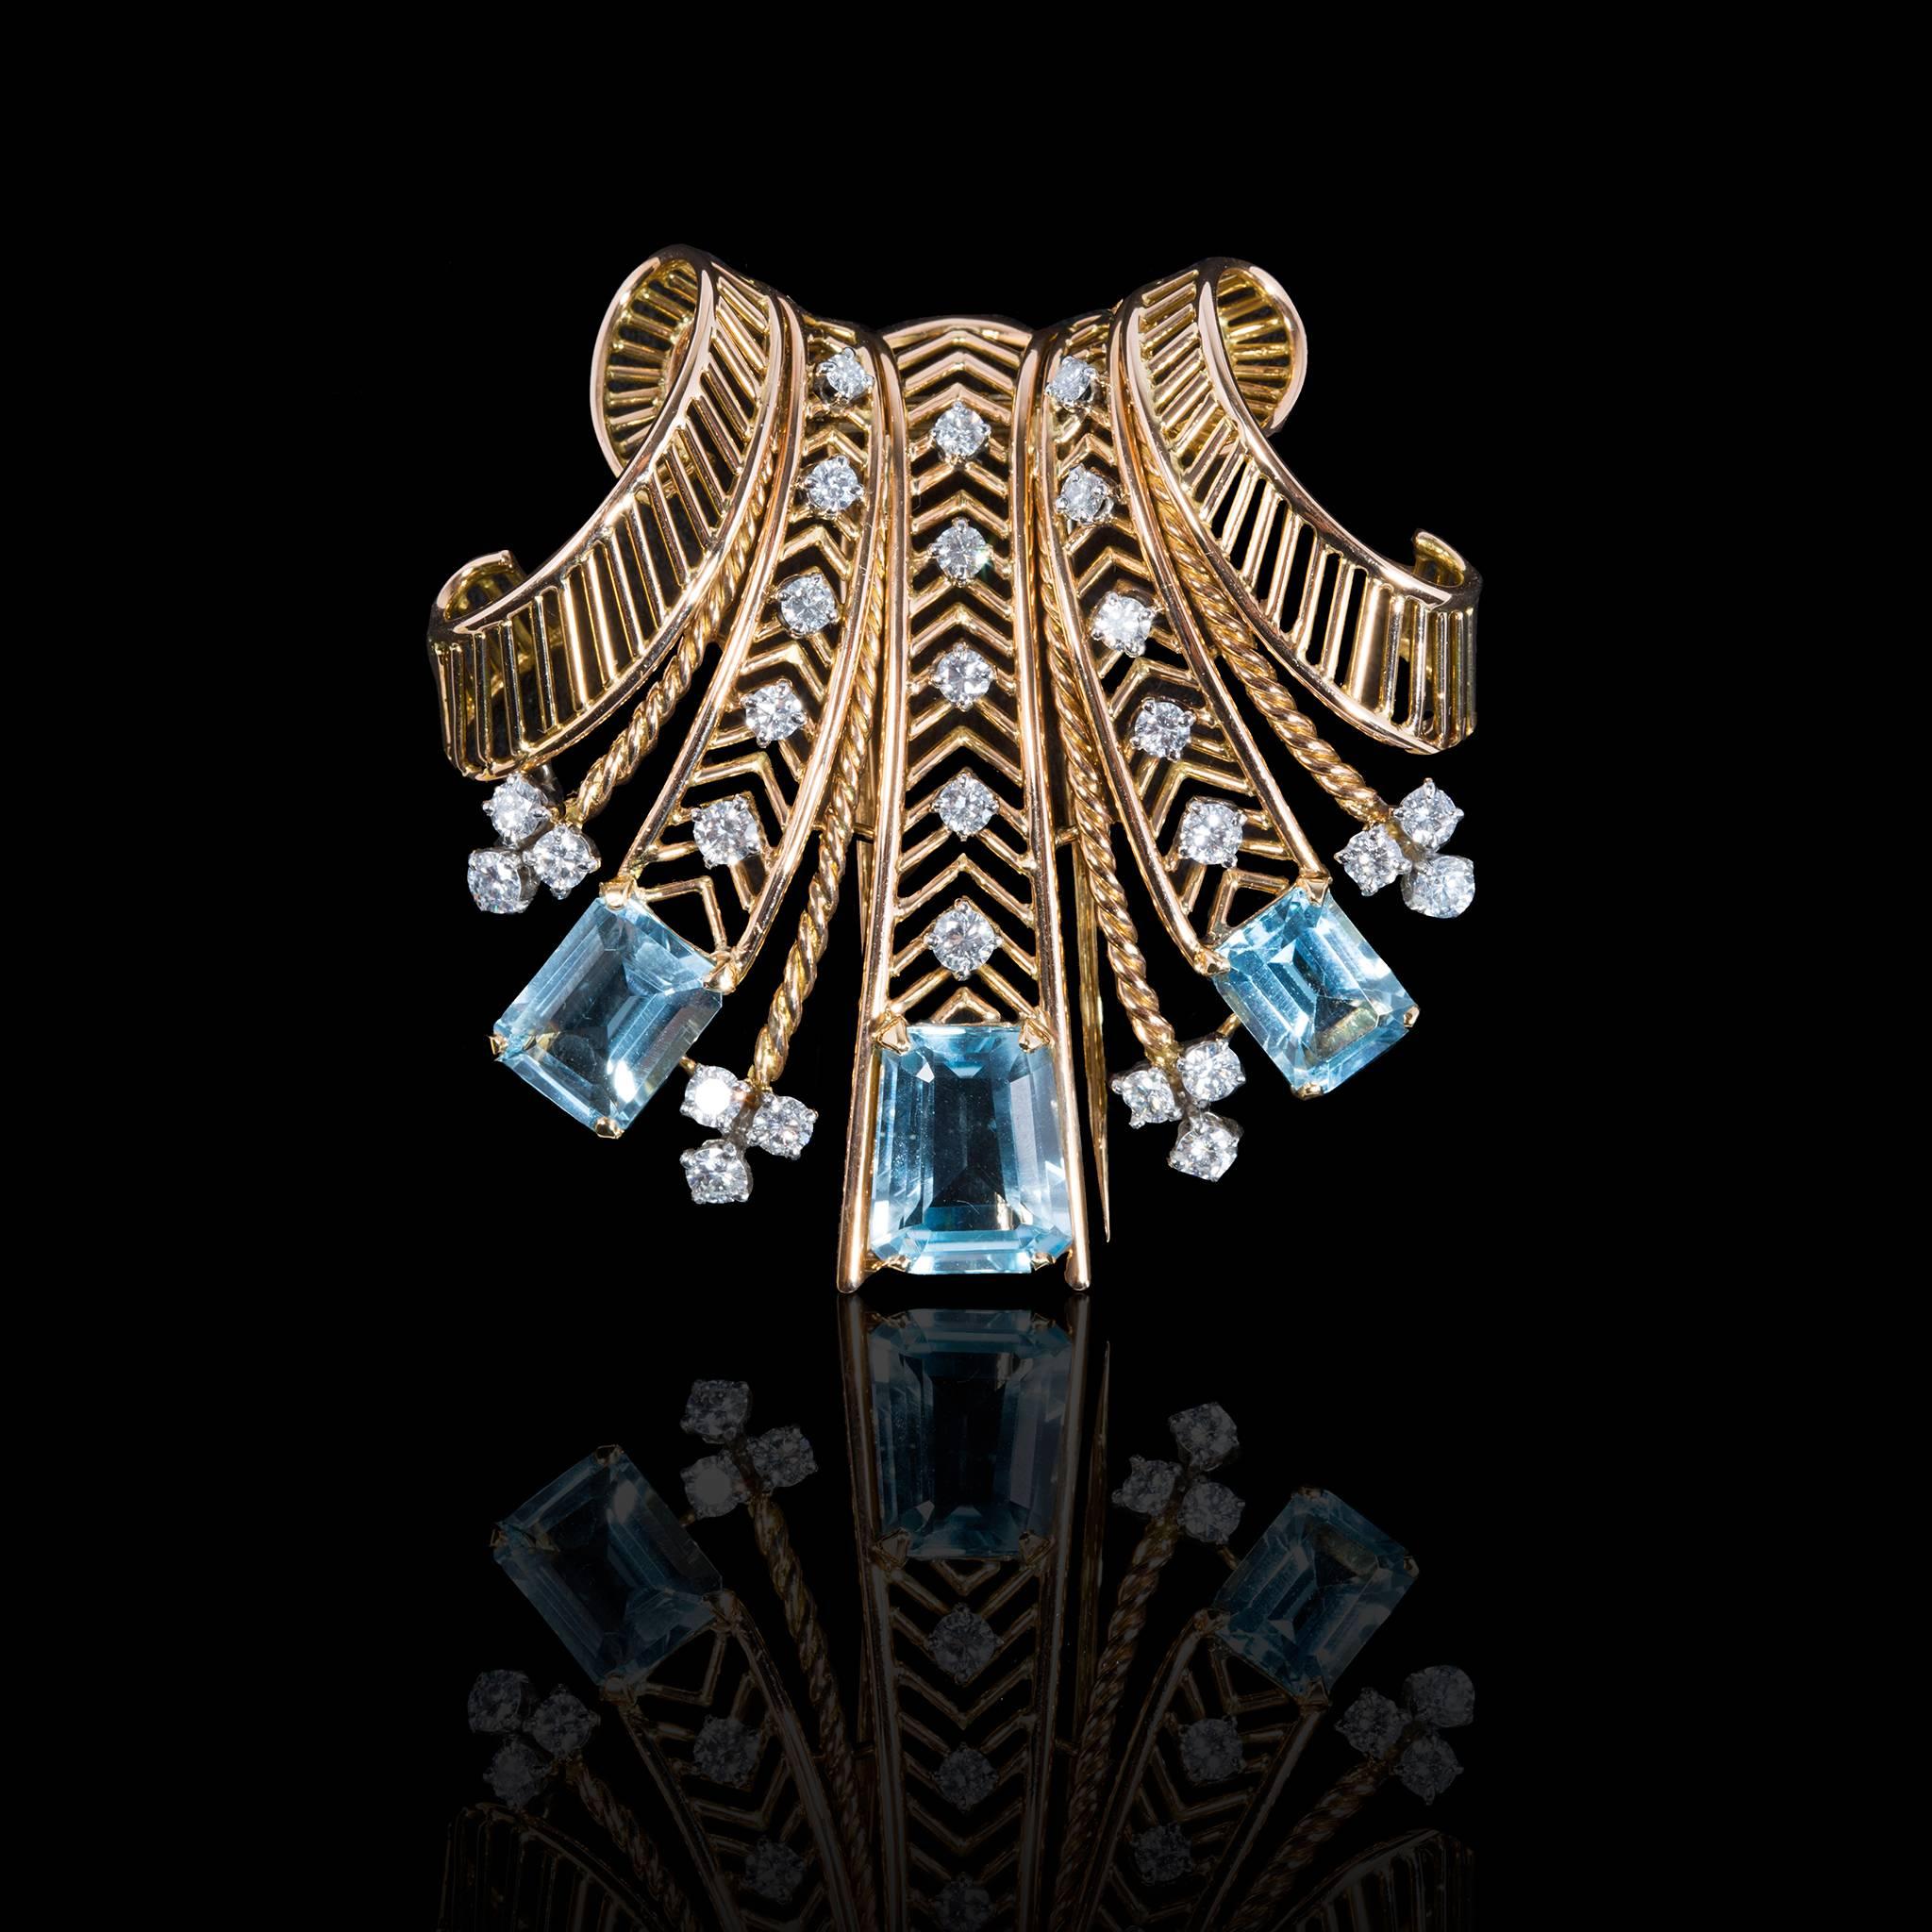 Boucheron 1940s topaz, diamond,platinum and 18 carats yellow gold Pendant-brooch.
Topaz :3 Emeralds-cut blue topazs
Diamonds: 27 diamonds .
-BOUCHERON is a French jeweler since 1858 ,created by Frederic Boucheron. In 1893 Frederic Boucheron became